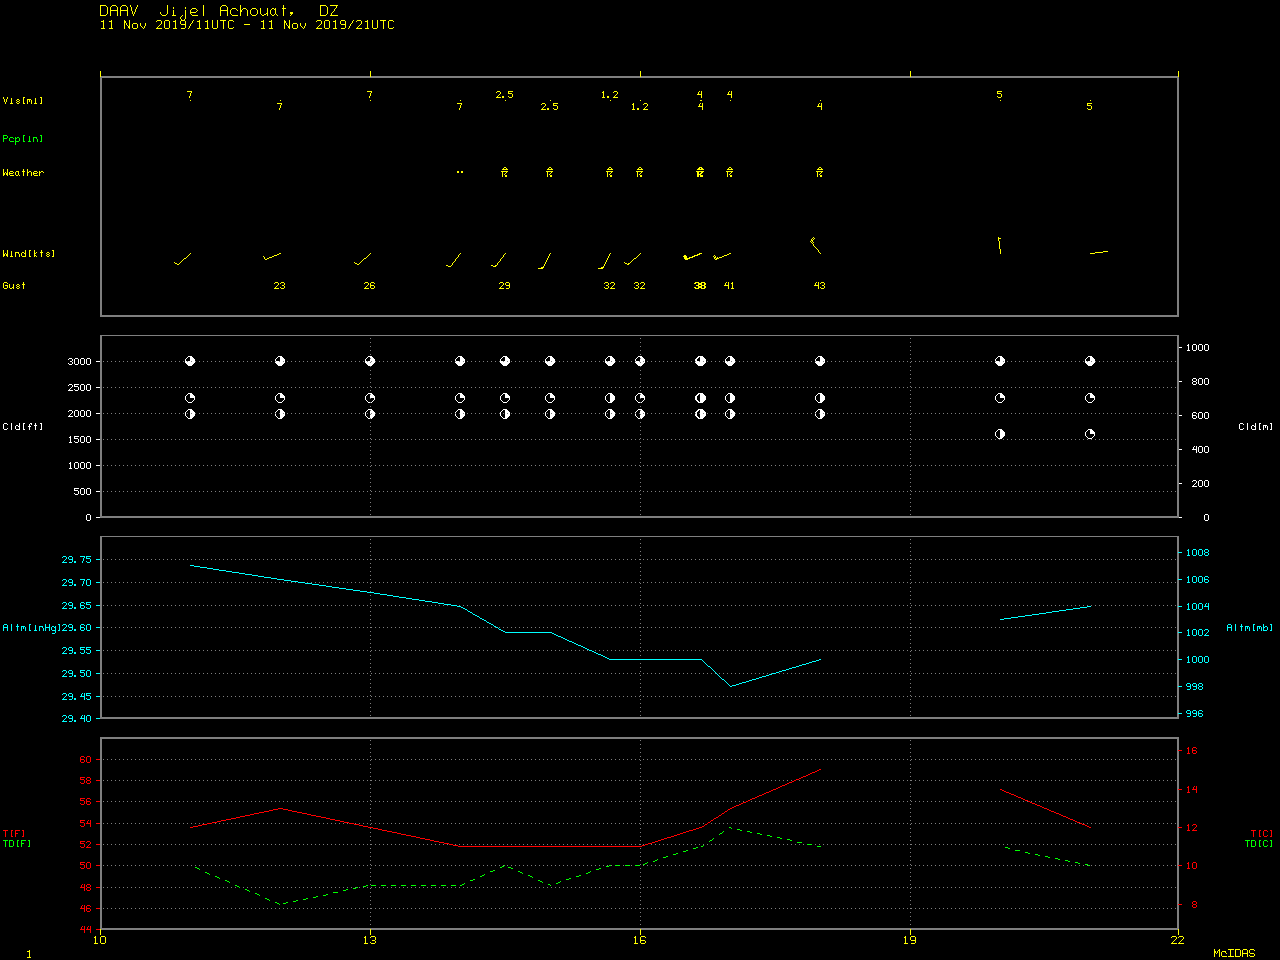 Time series of surface observation data from Jijel, Algeria [click to enlarge]